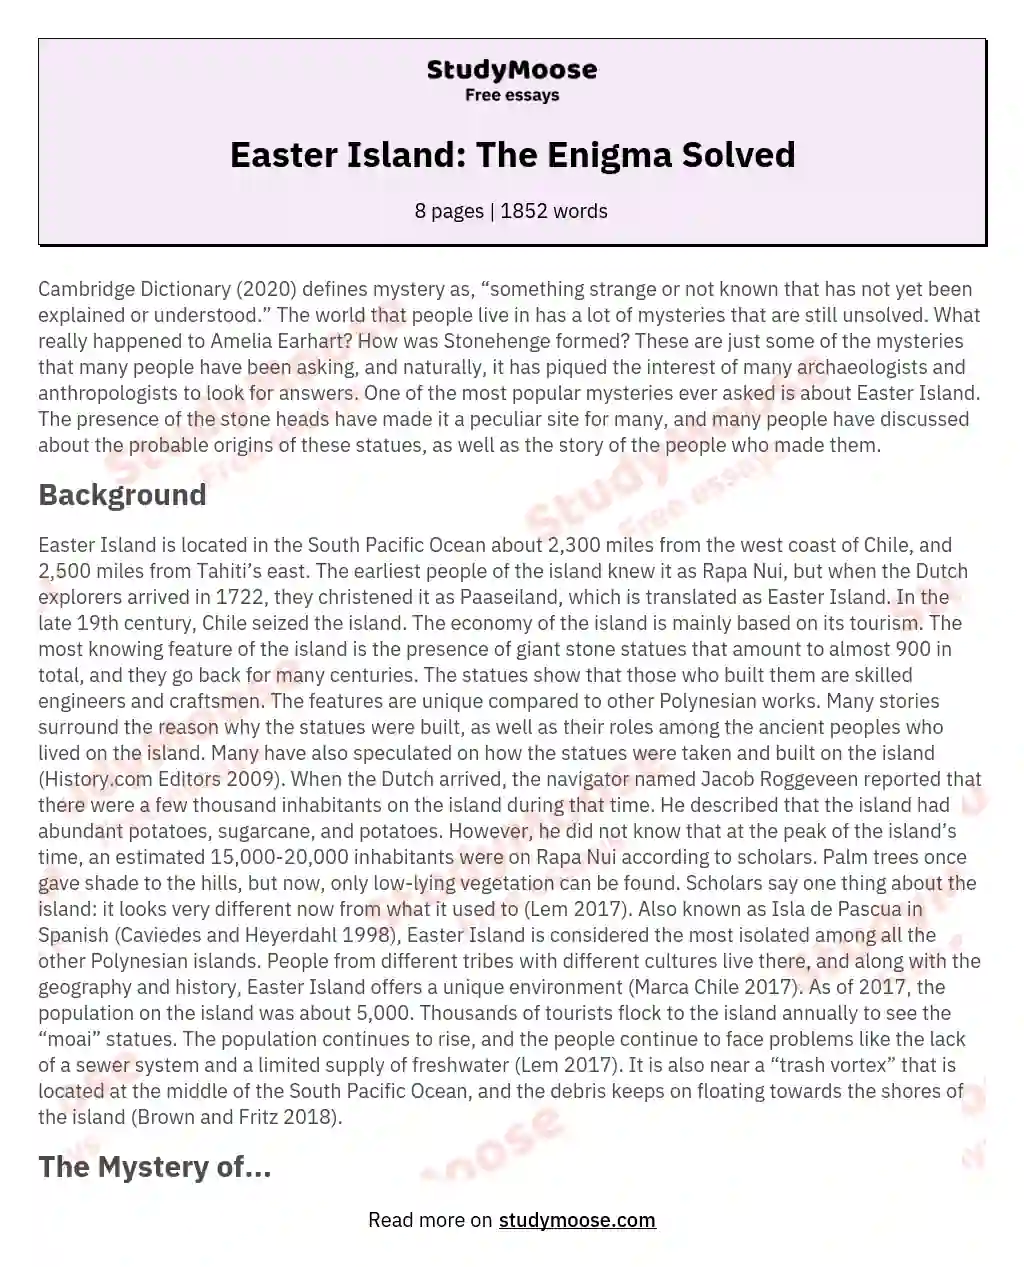 Easter Island: The Enigma Solved essay